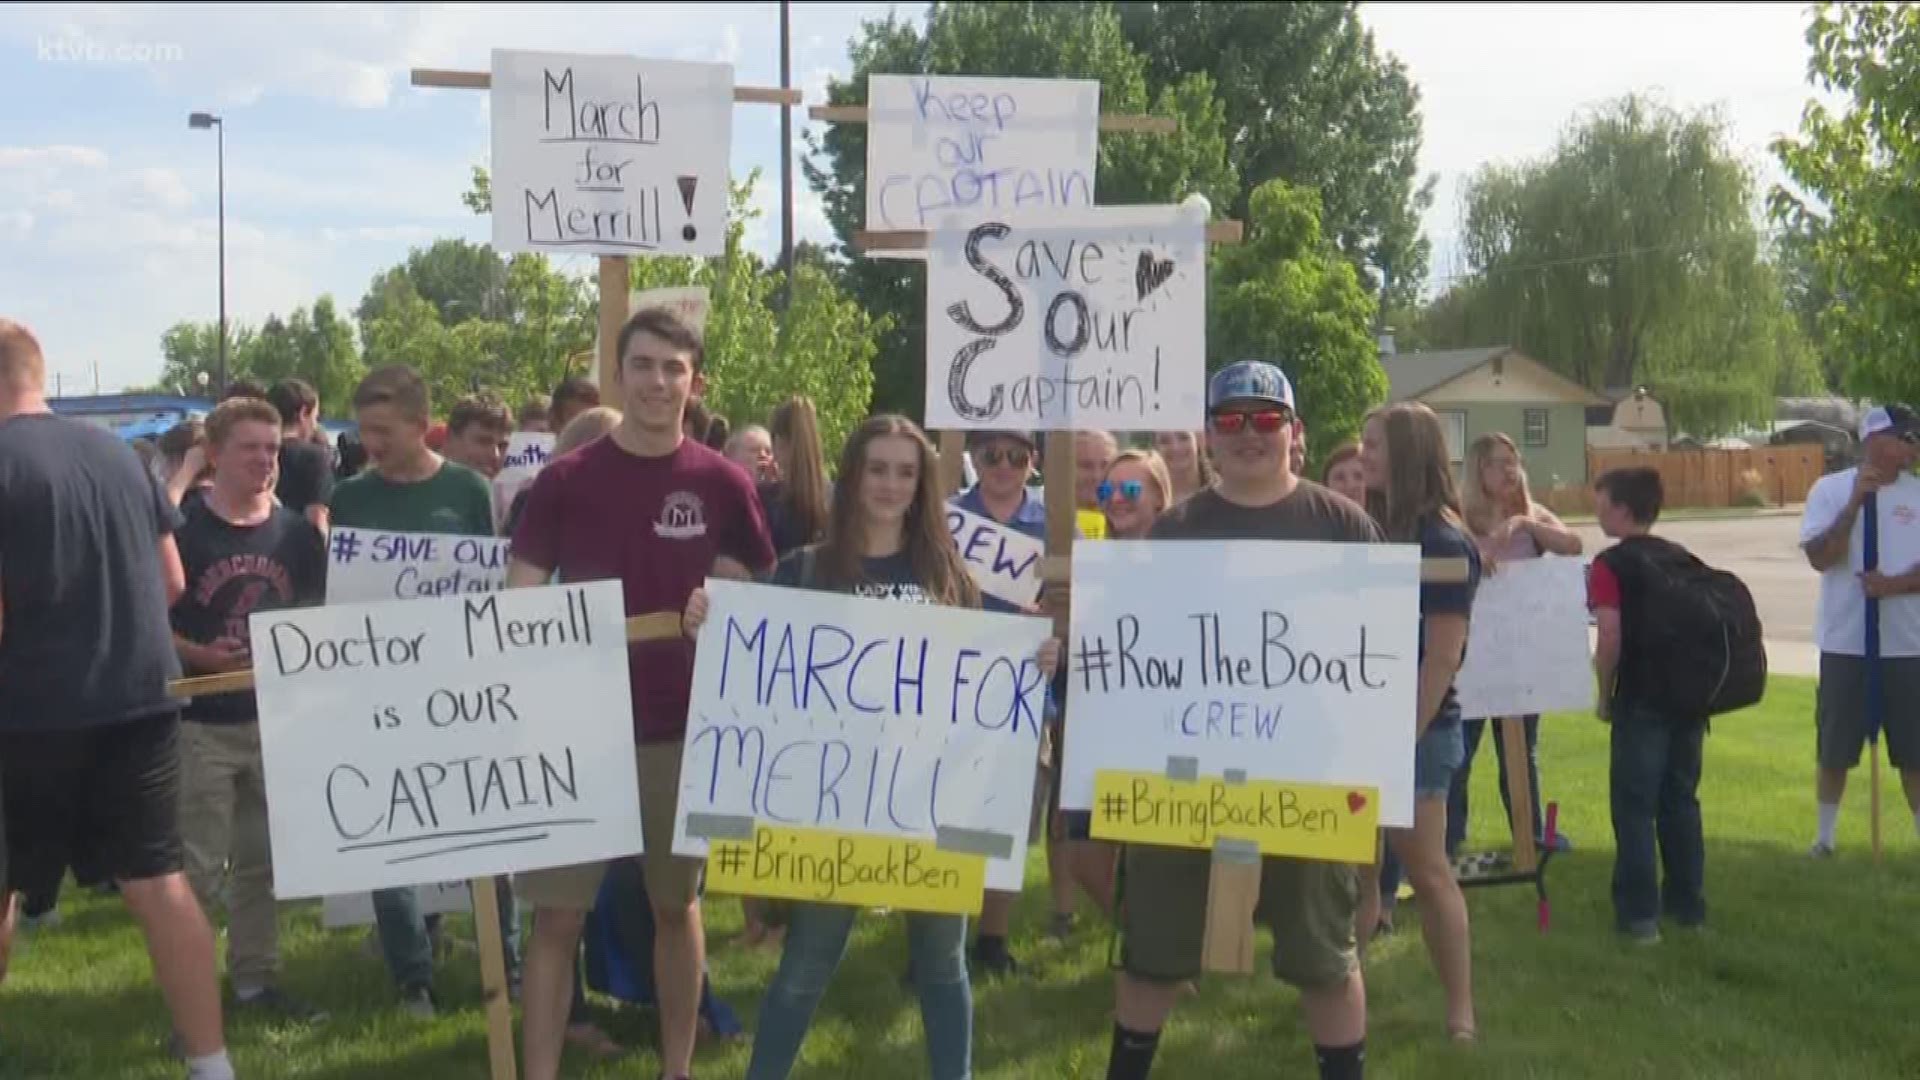 Dozens of students, many carrying signs in support of Middleton High School Principal Ben Merrill, marched to Monday night's school board meeting in an effort to get him reinstated.